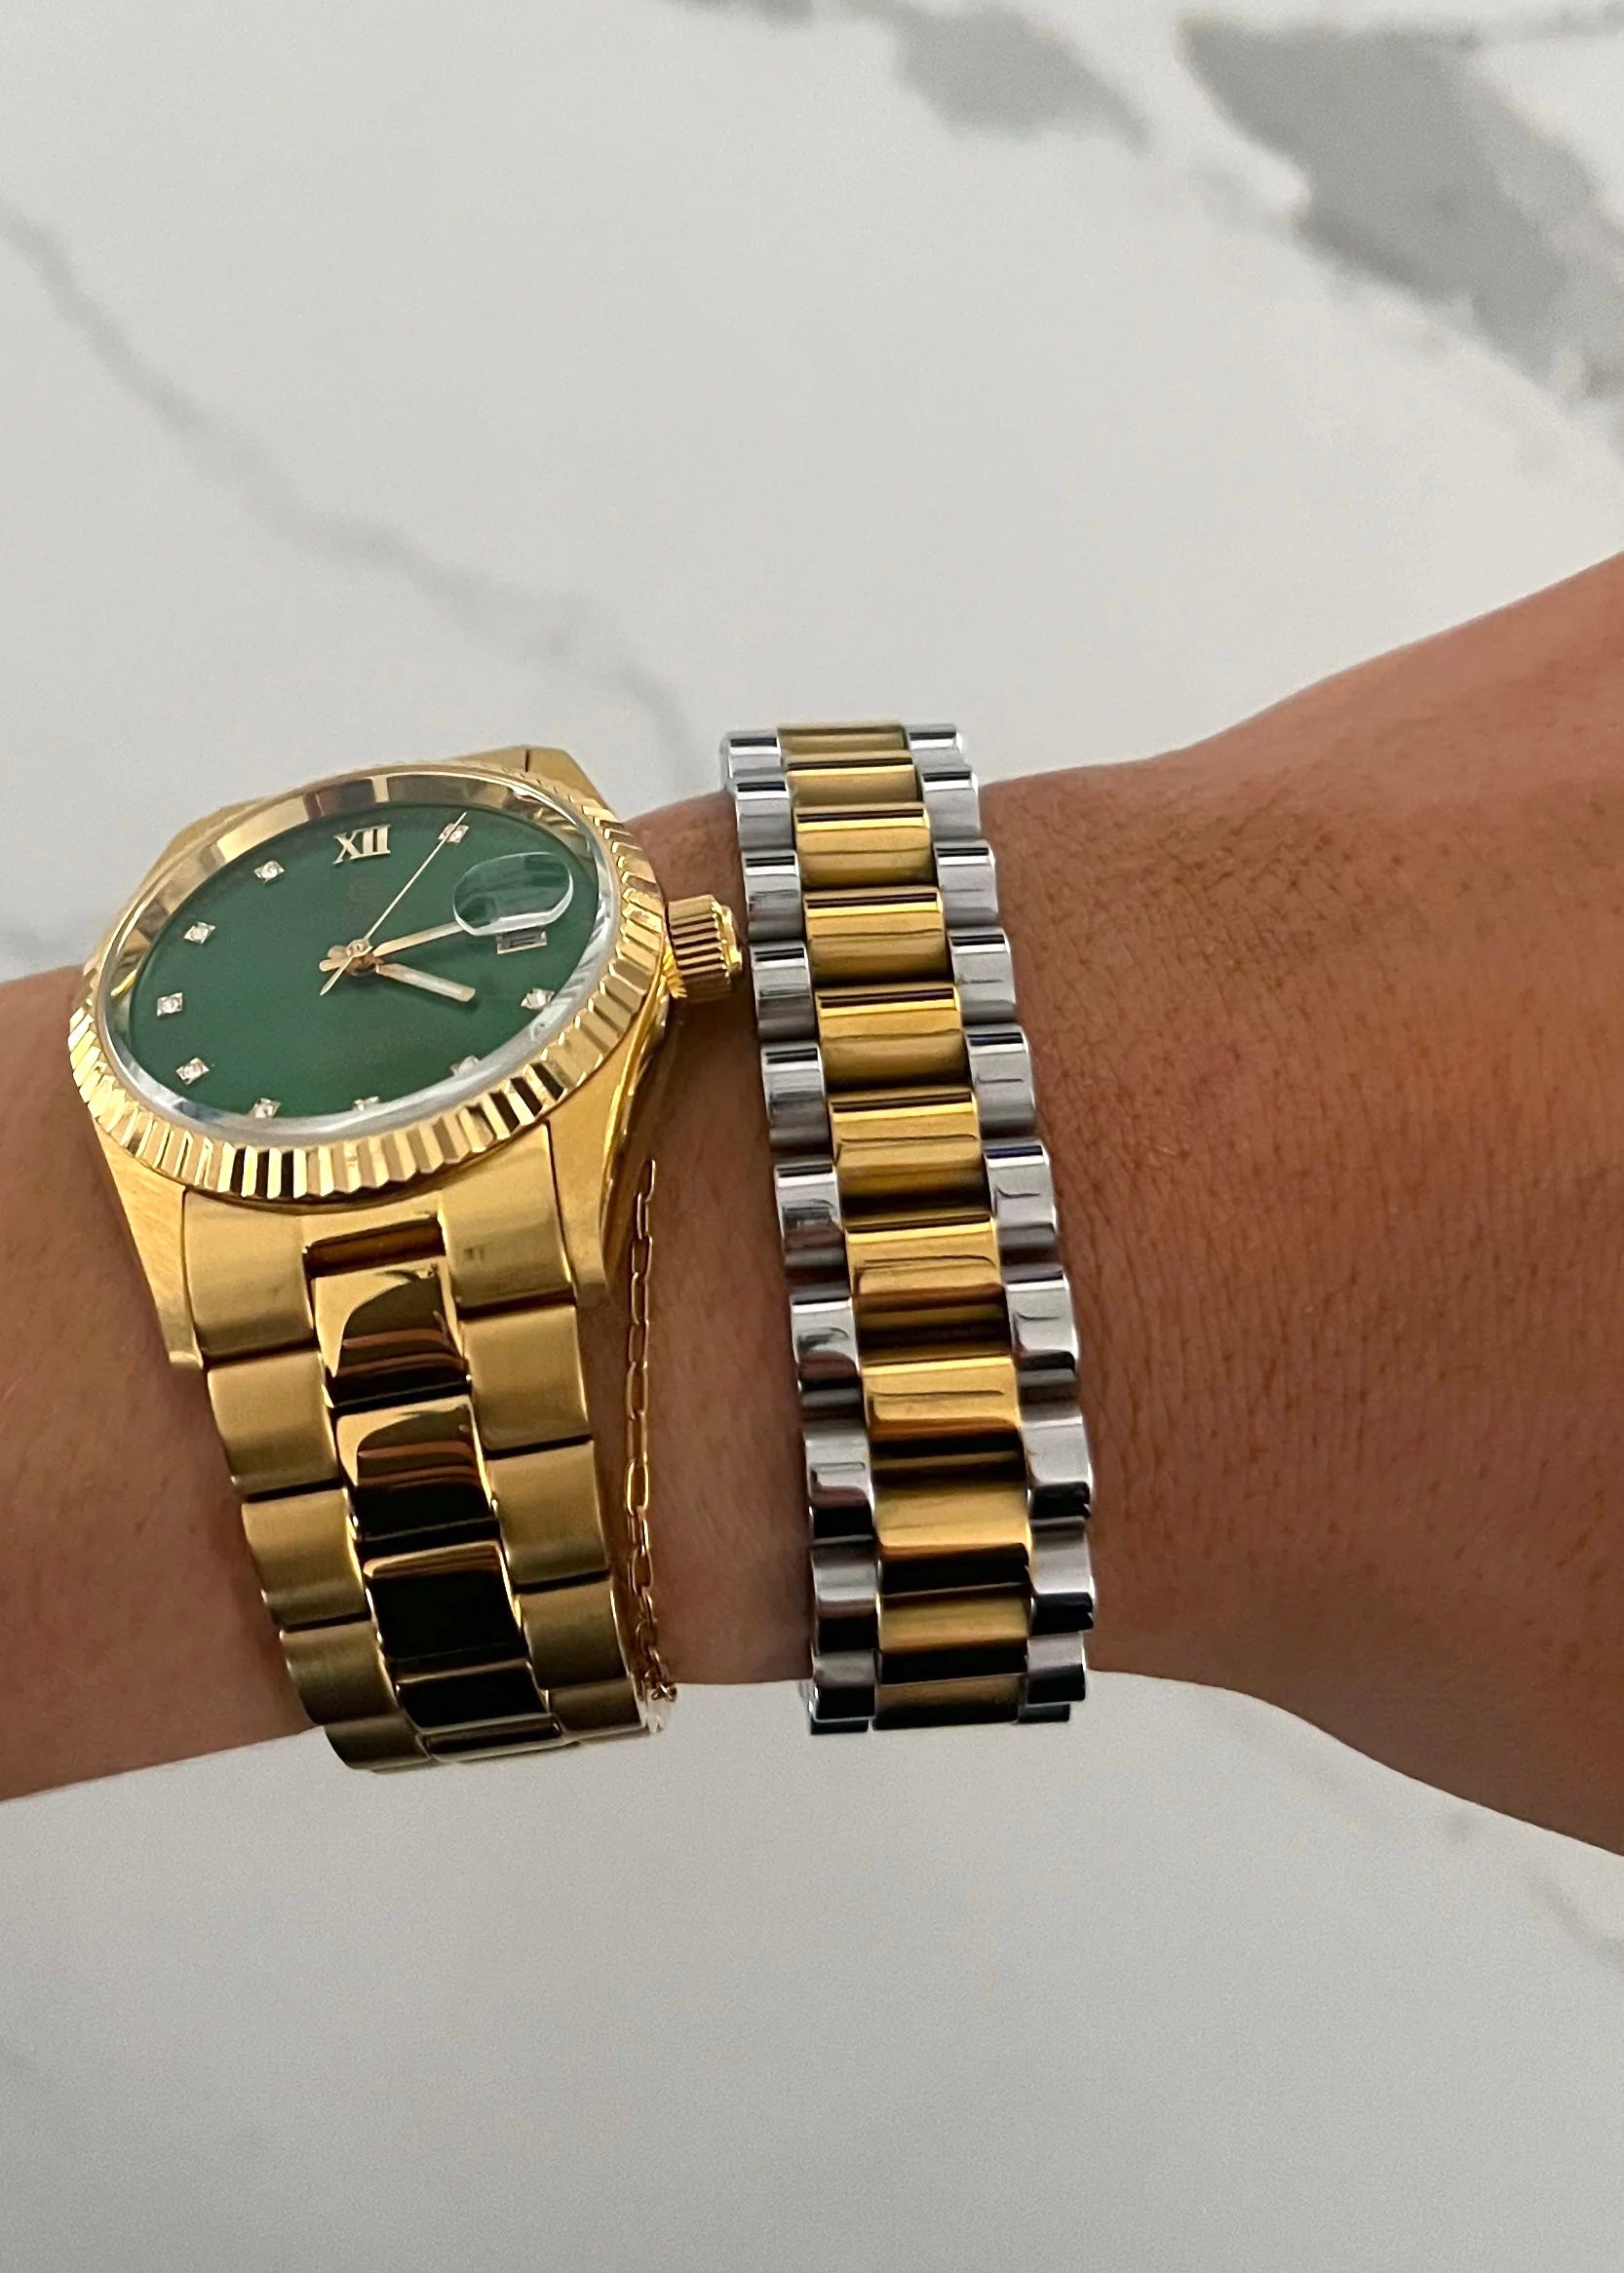 The XL Two-Toned Watch Band Bracelet